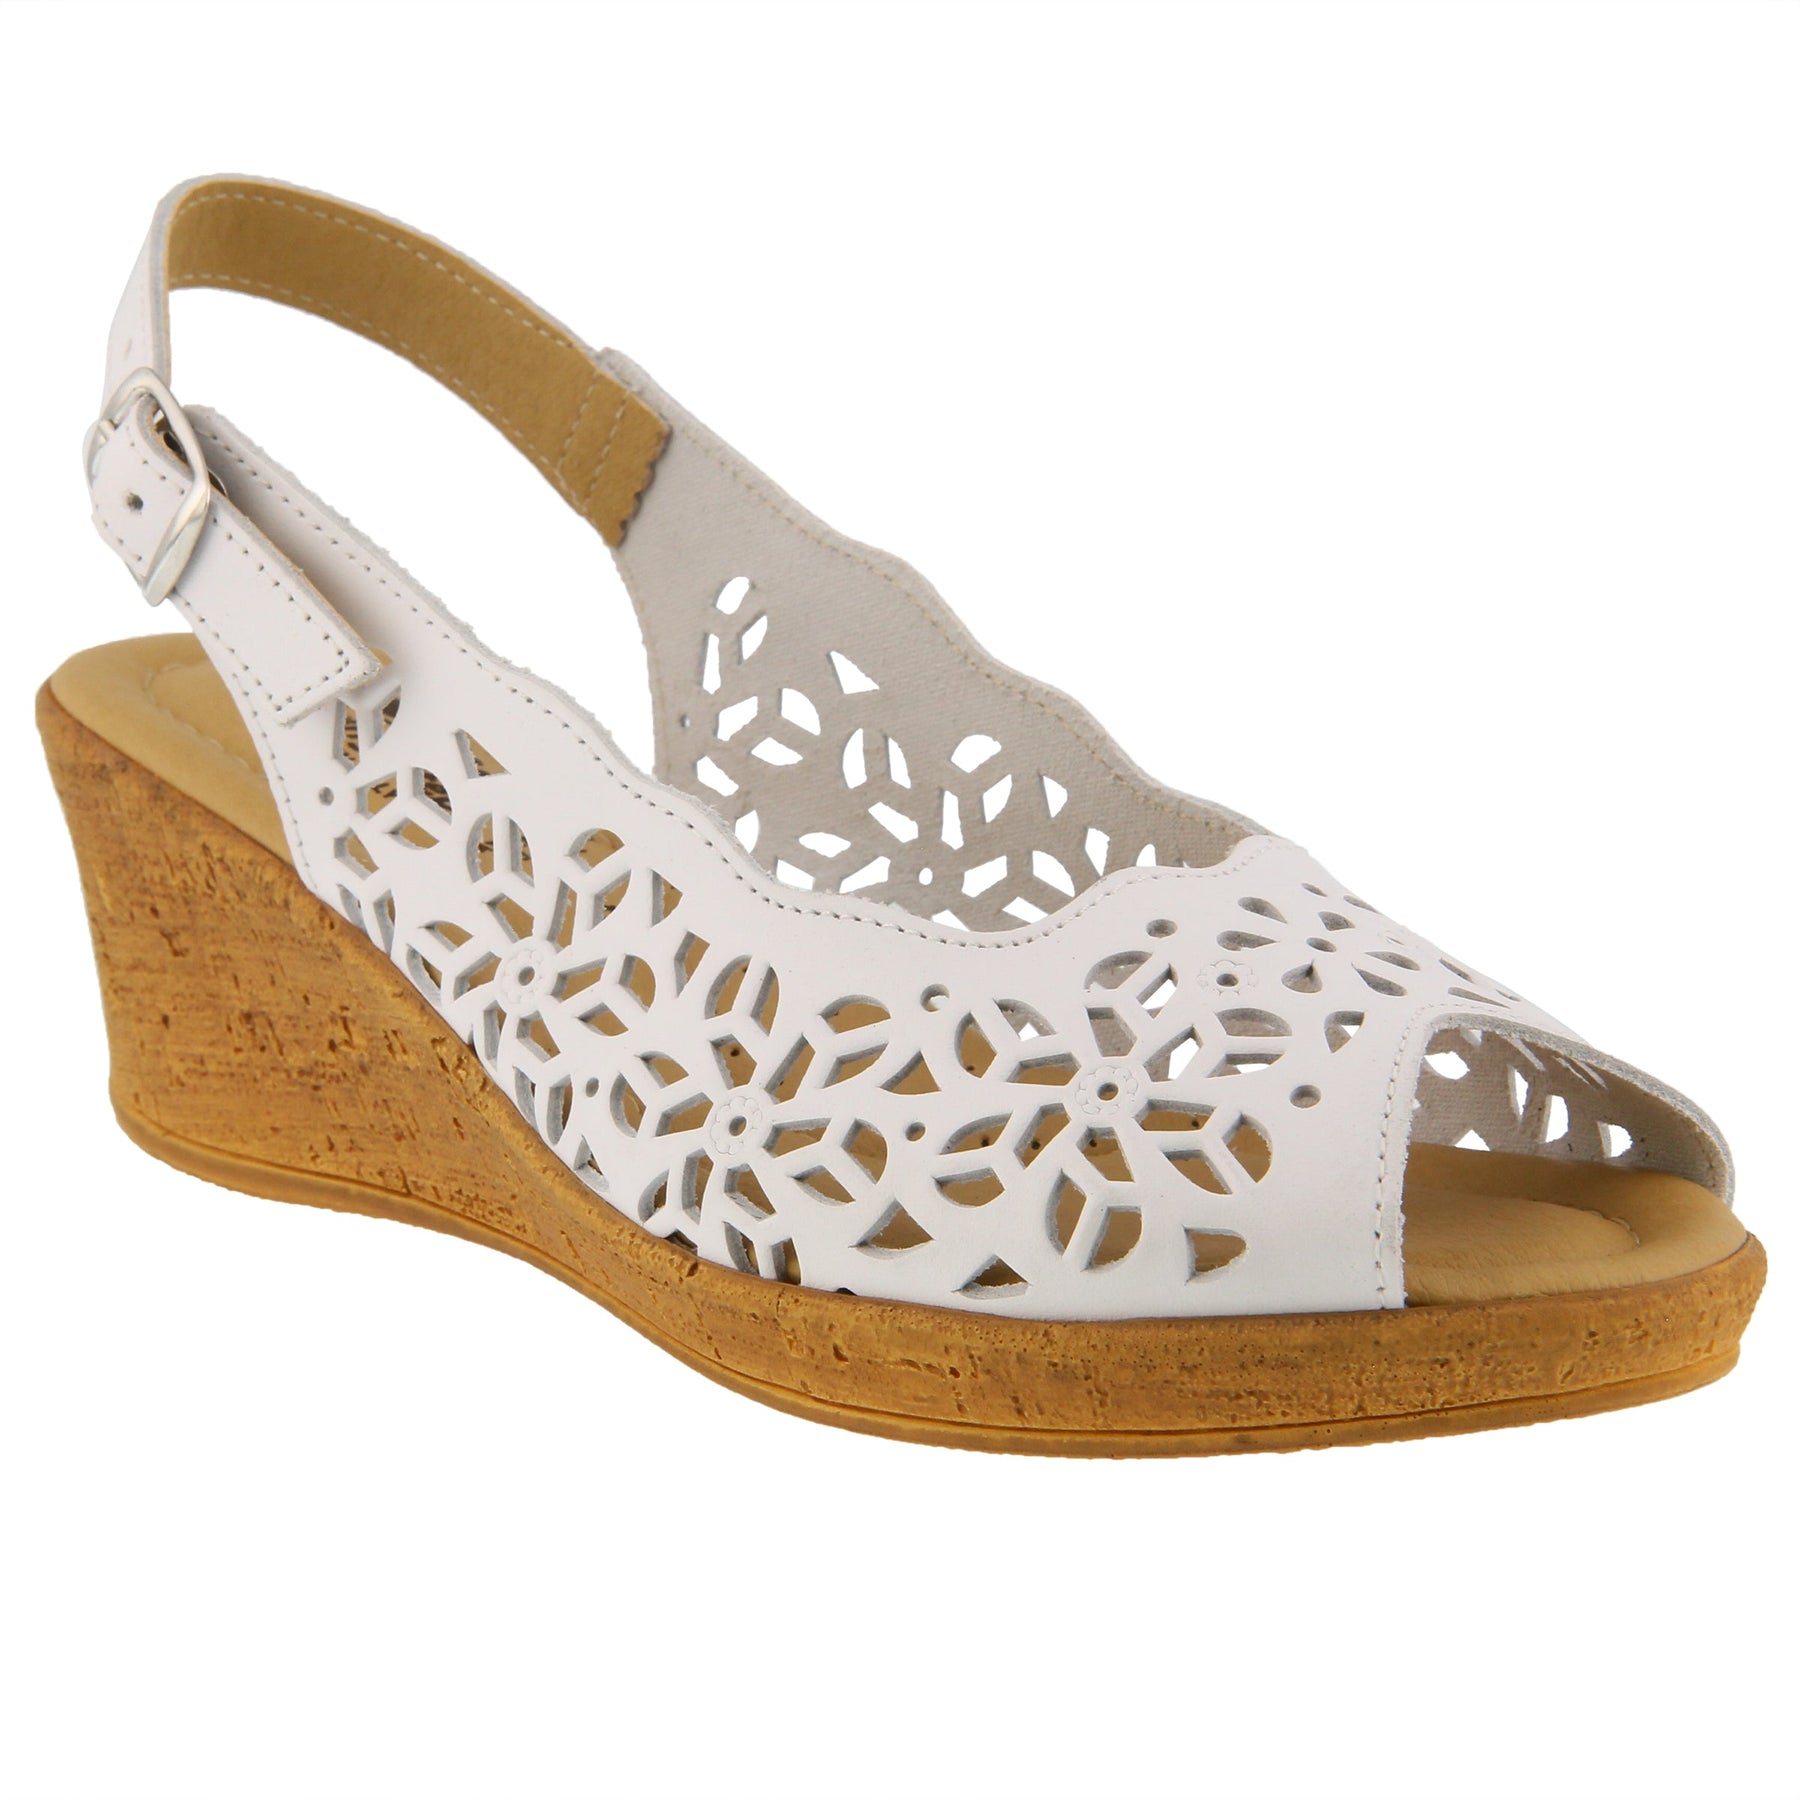 Footsie Slingback Sandals: Wedge Sandals – Spring Step Shoes